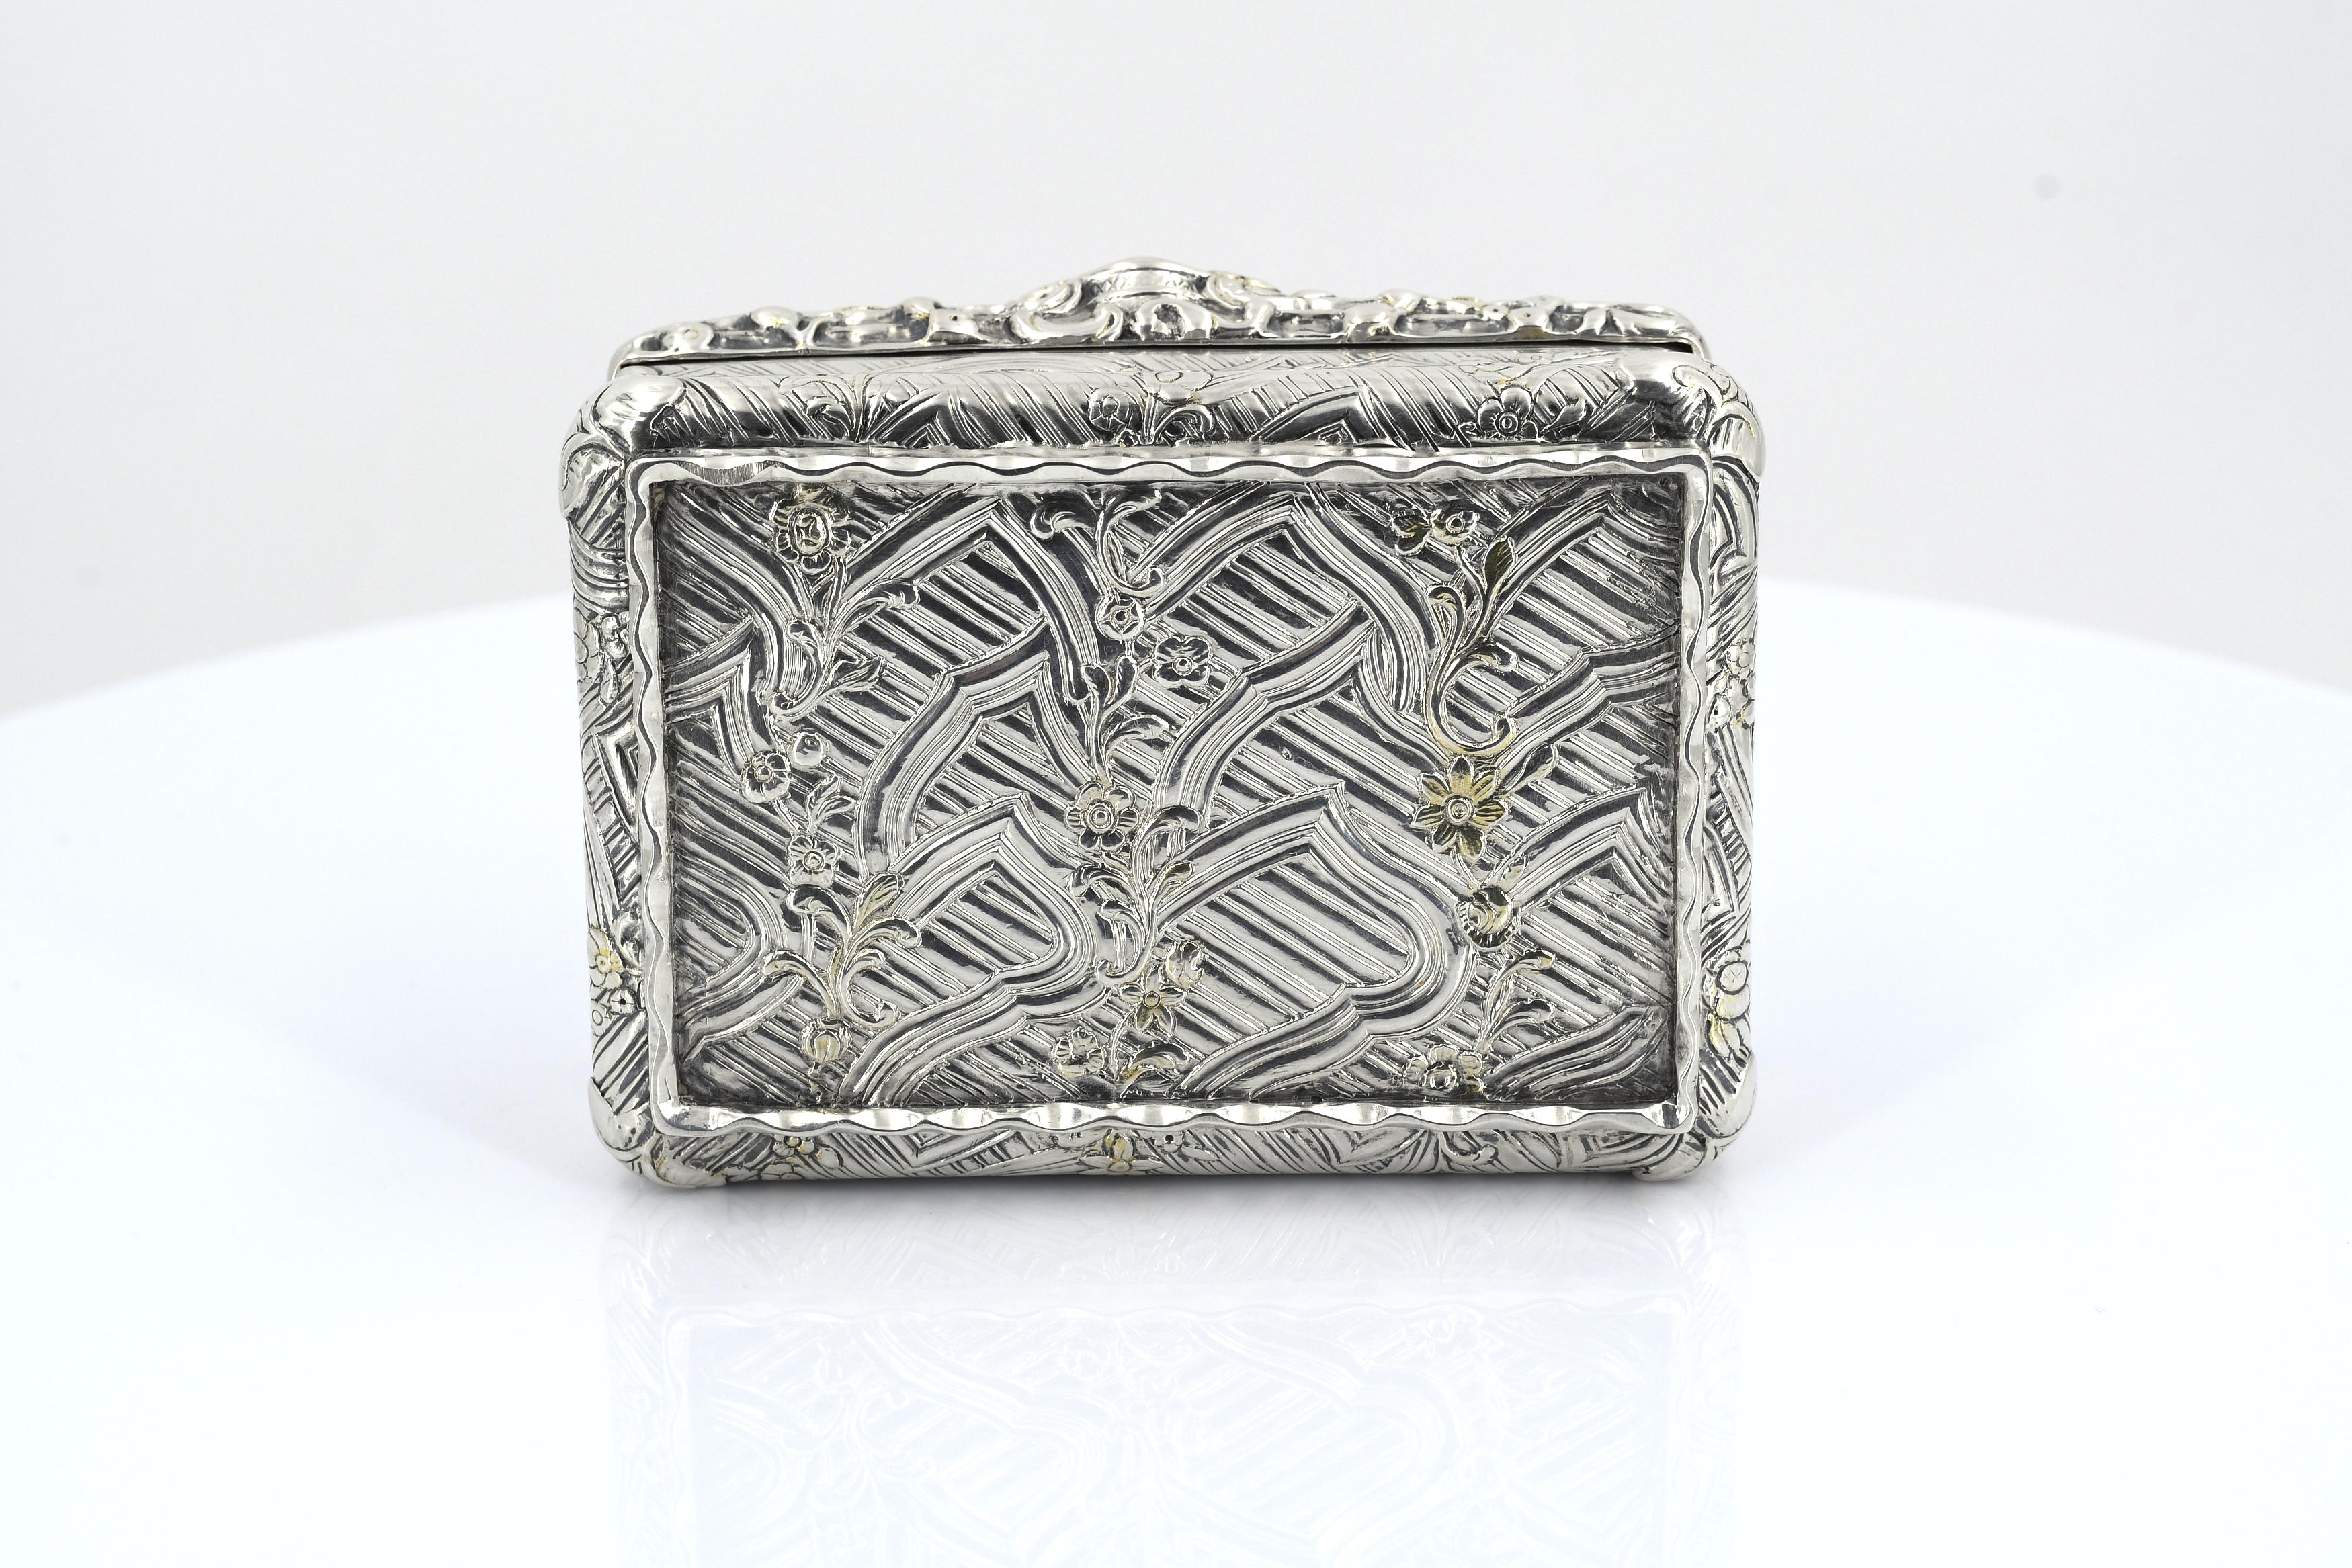 Silver snuffbox with flower tendrils - Image 7 of 9